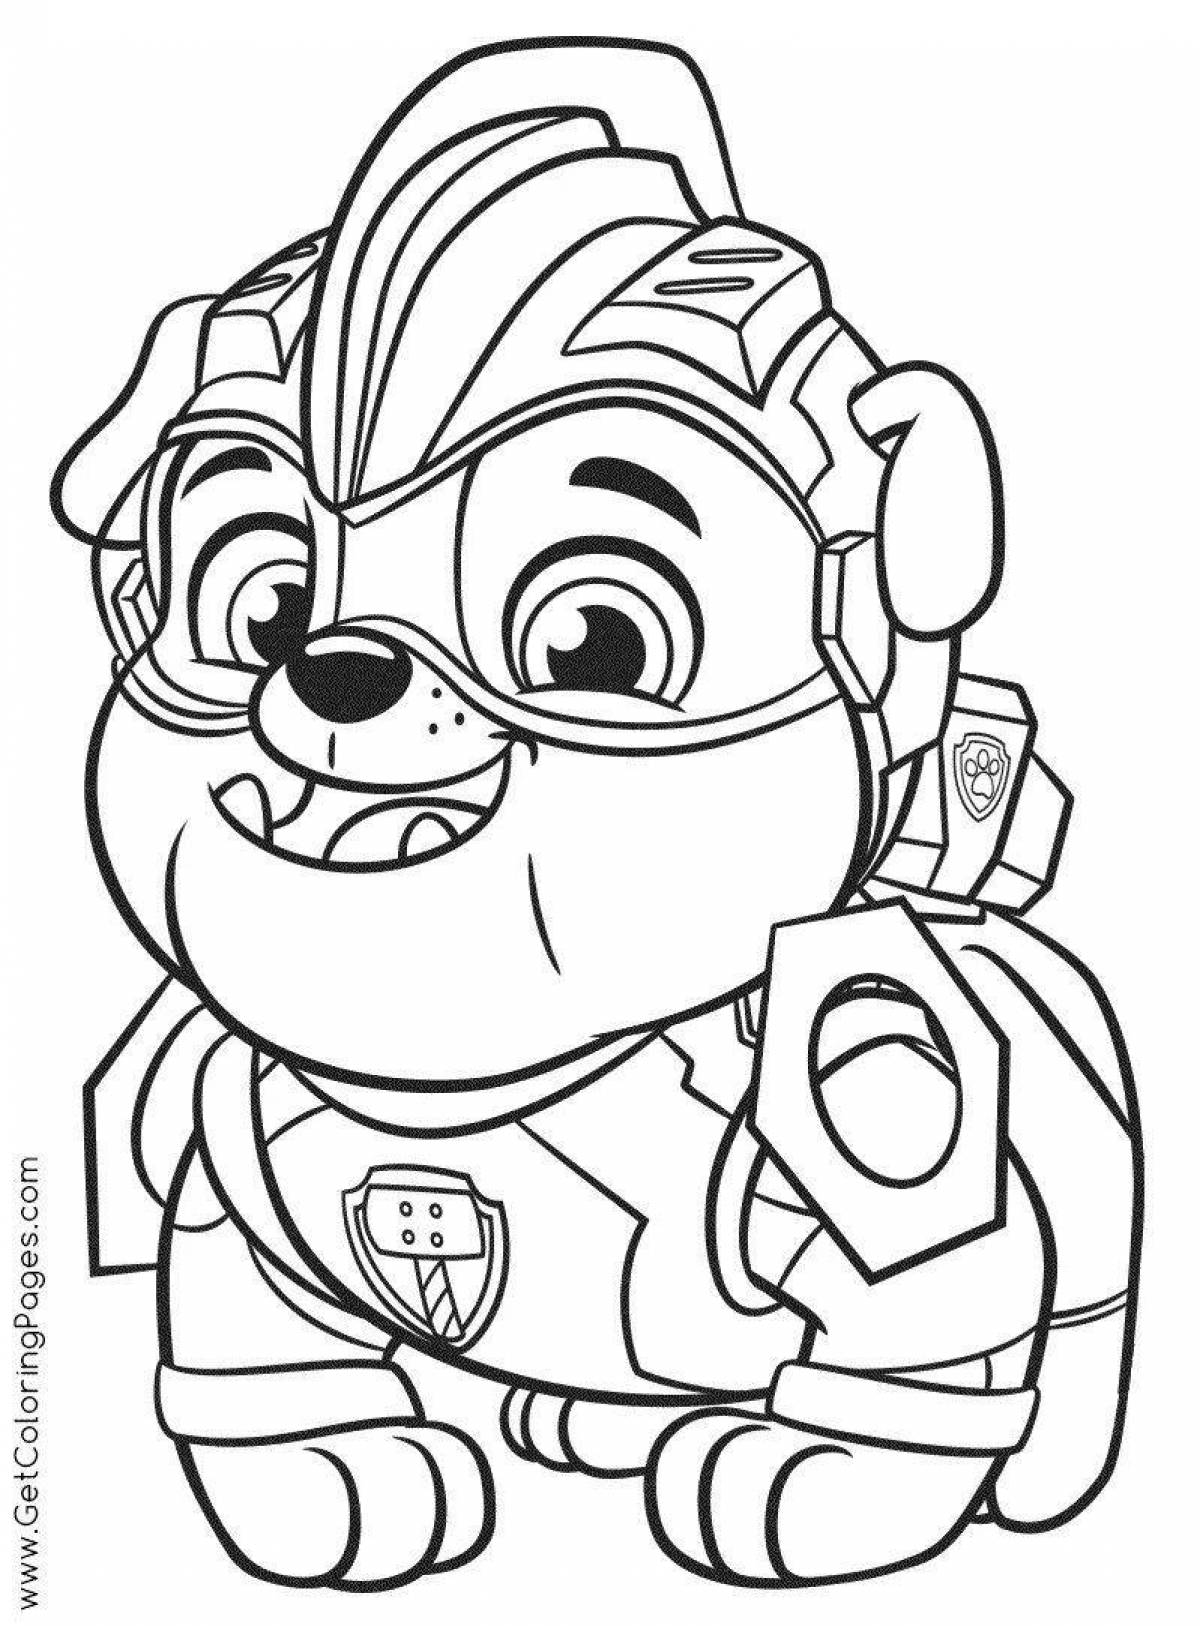 Magic coloring page paw patrol super puppies